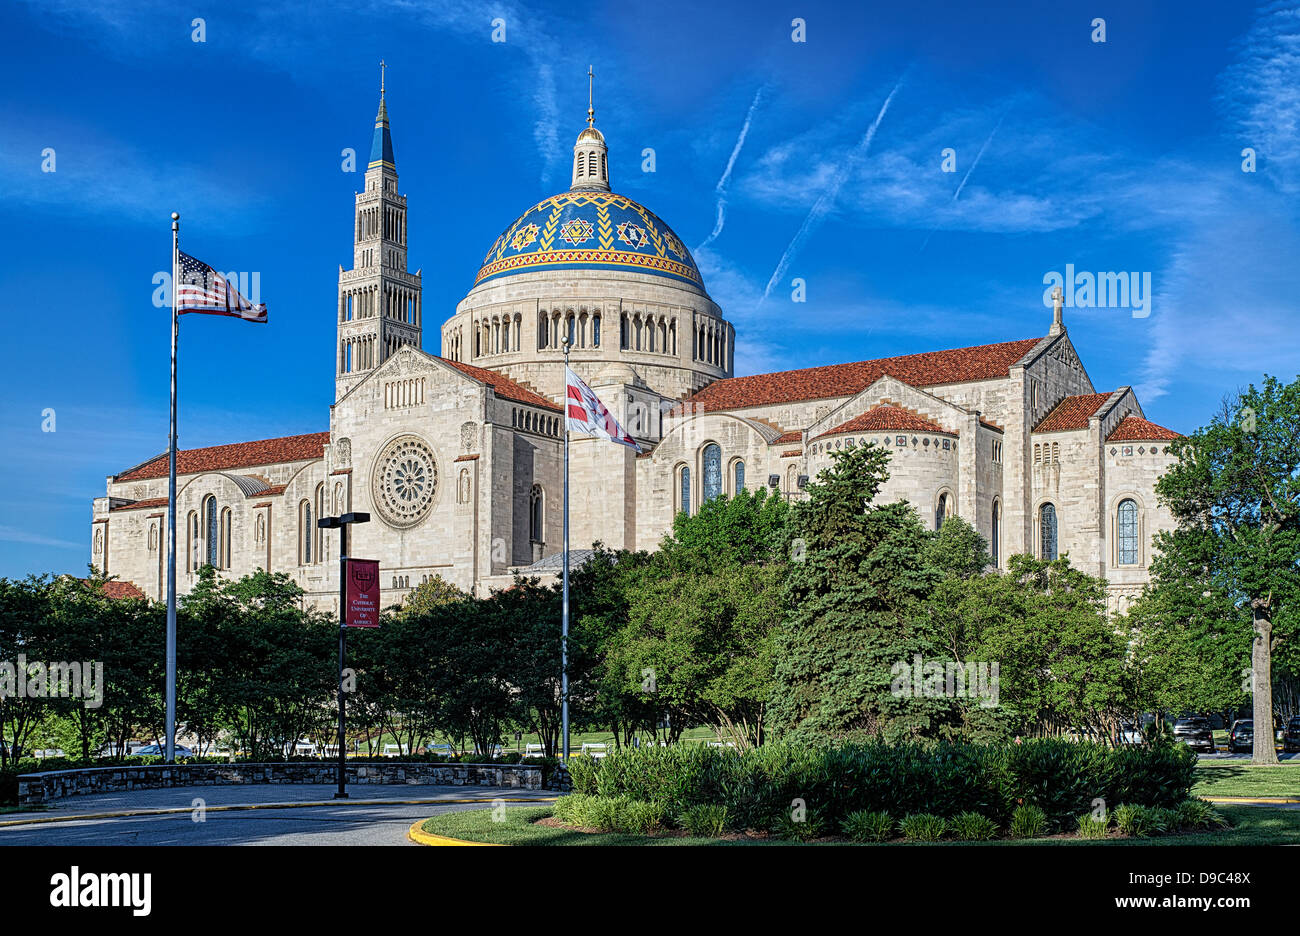 The Basilica of the National Shrine of the Immaculate Conception, Washington, D.C., USA Stock Photo